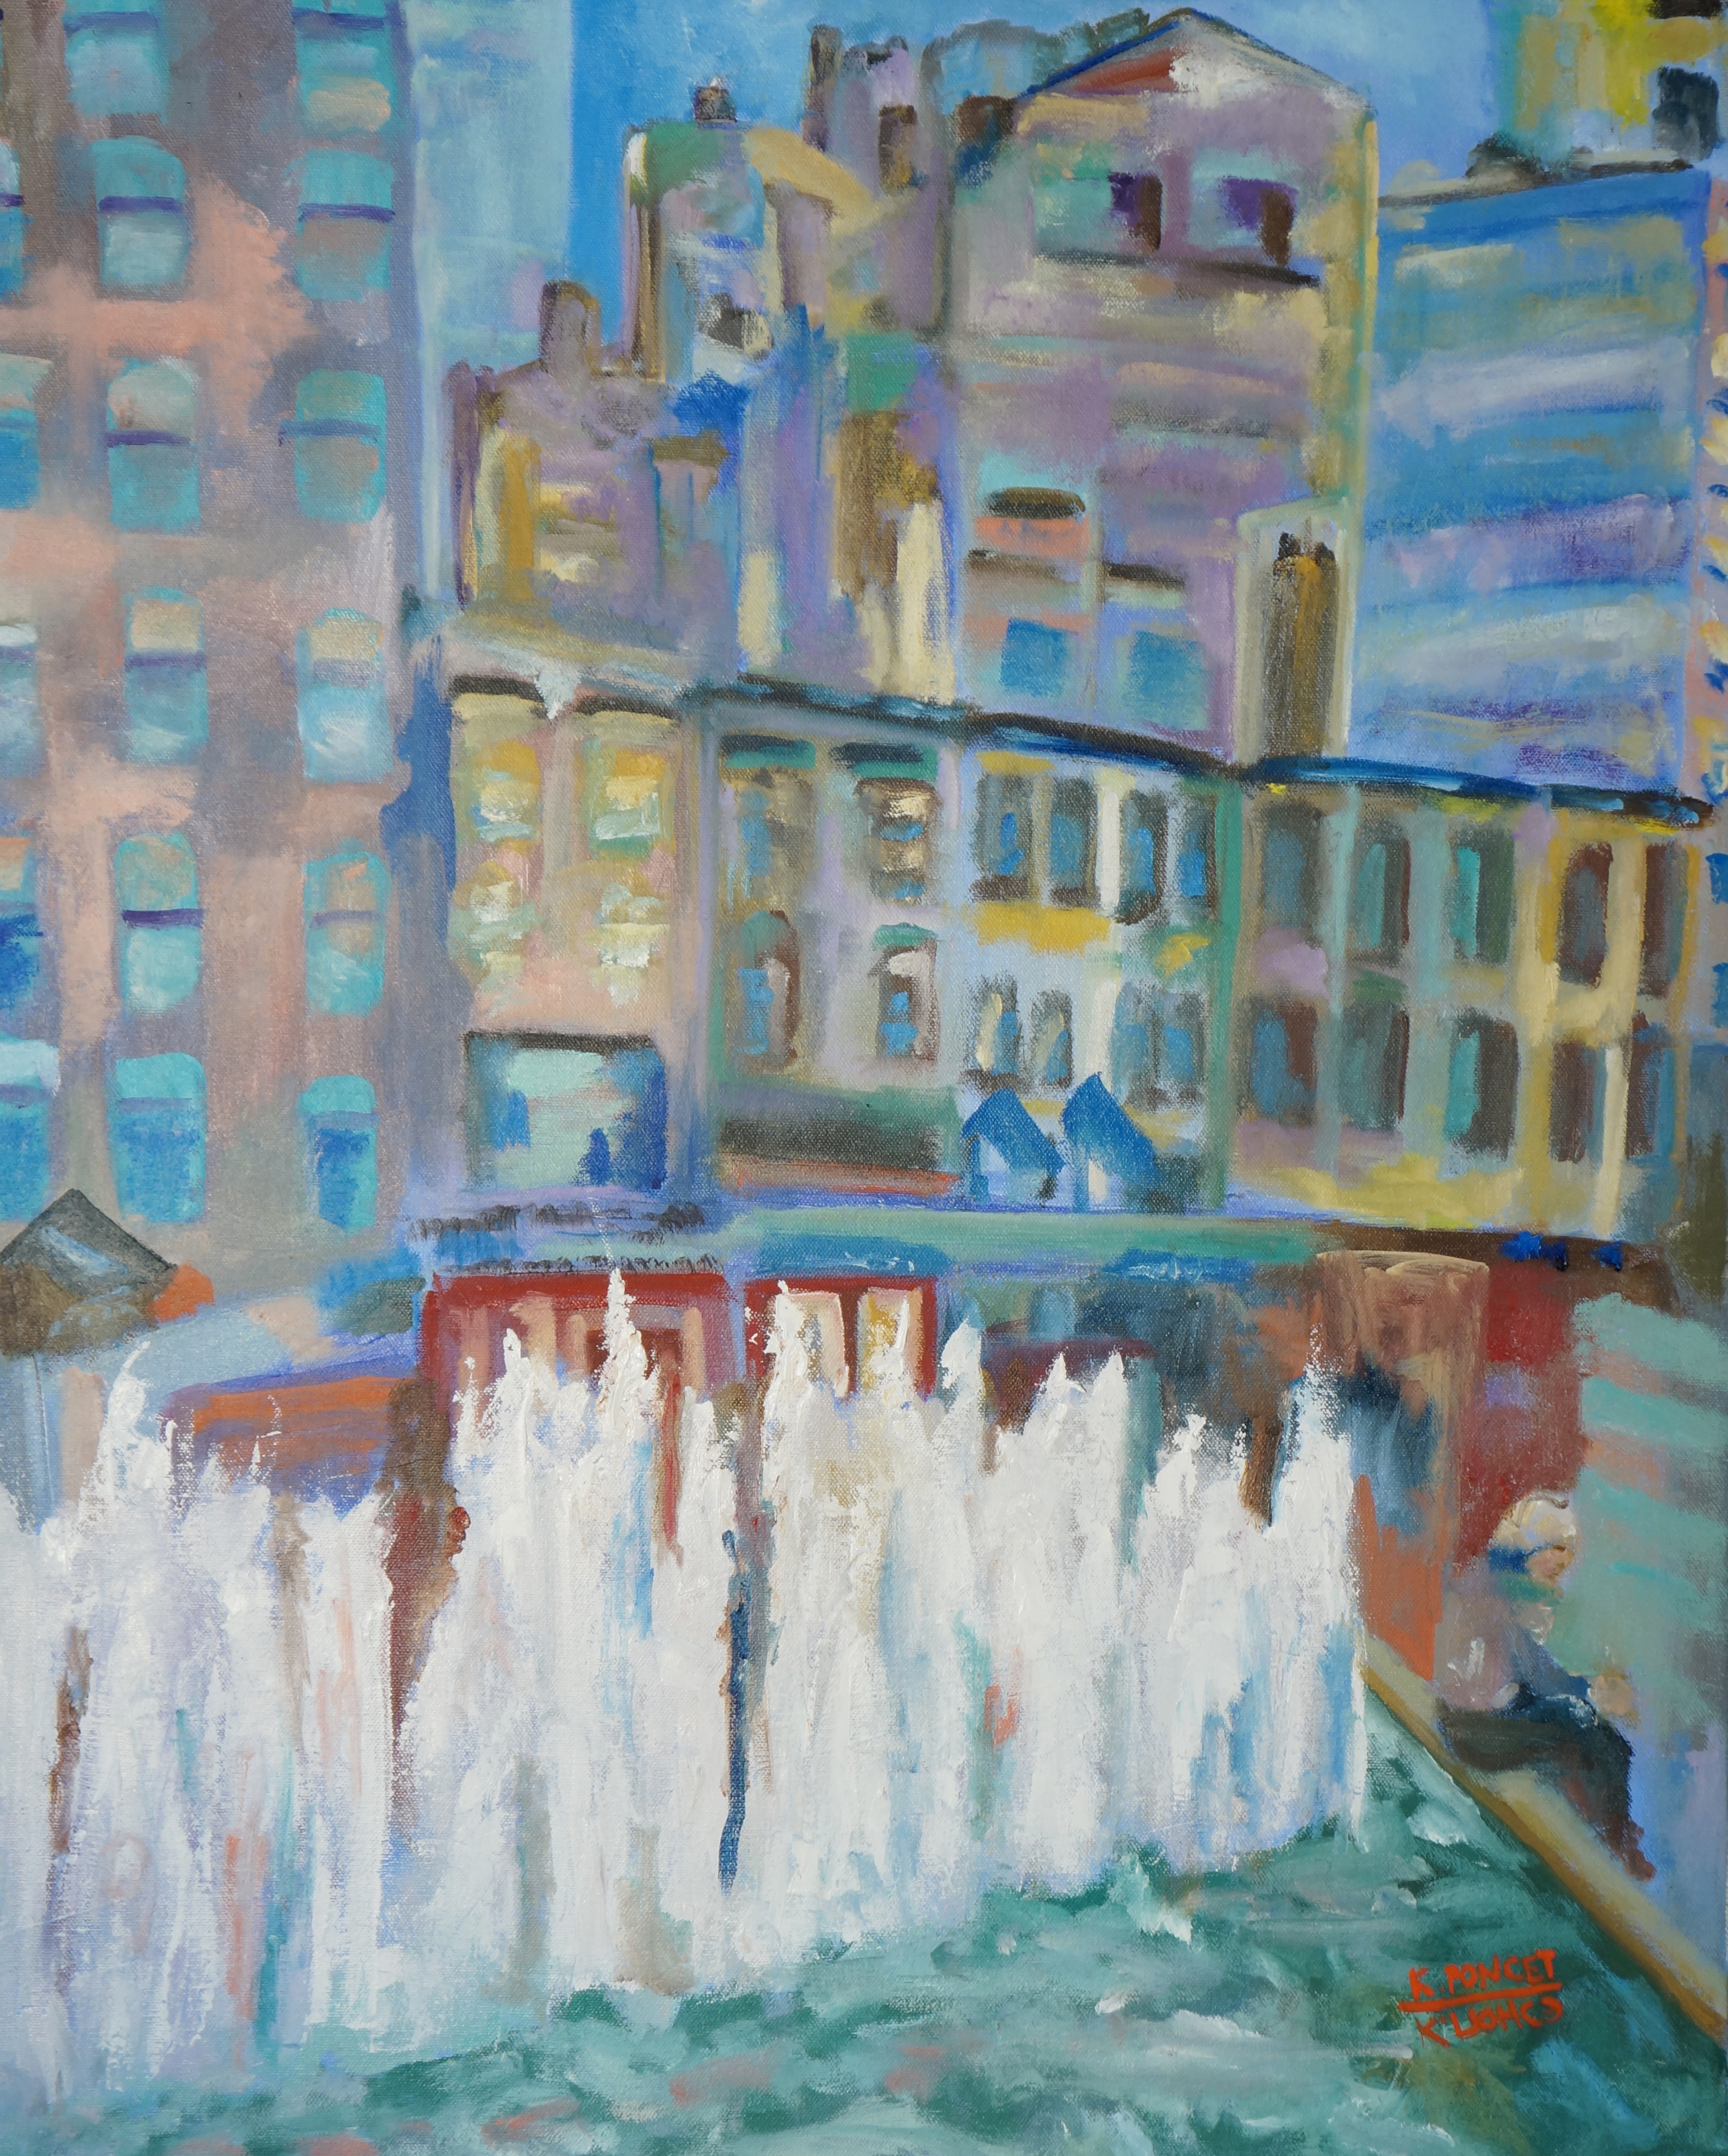 Contemporary oil painting representing the fountain on the 57th street and Lexington avenue in New York.